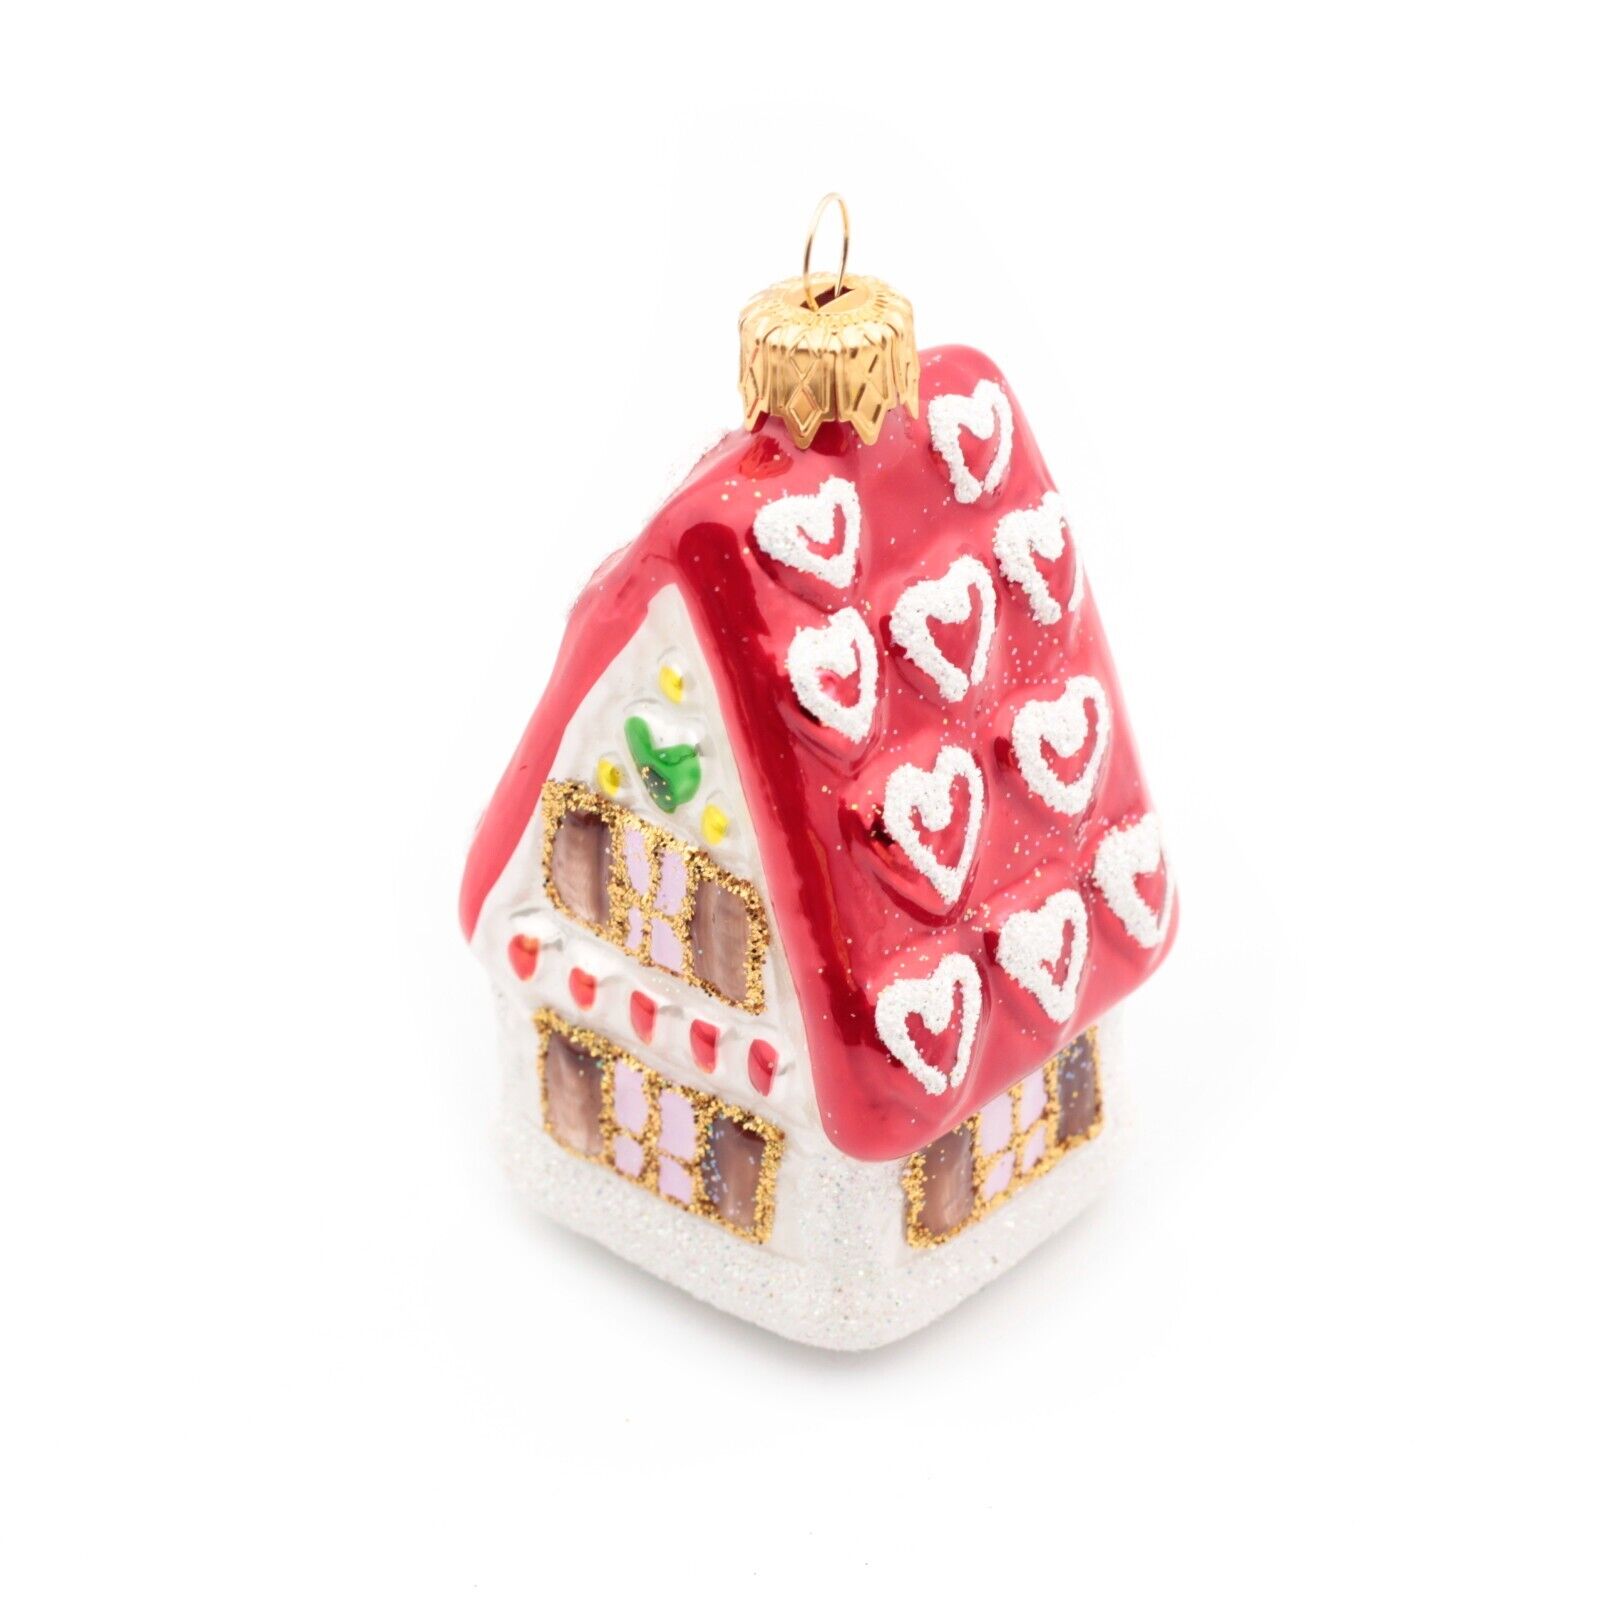 Czech blown glass gingerbread house Christmas tree ornament Choose color